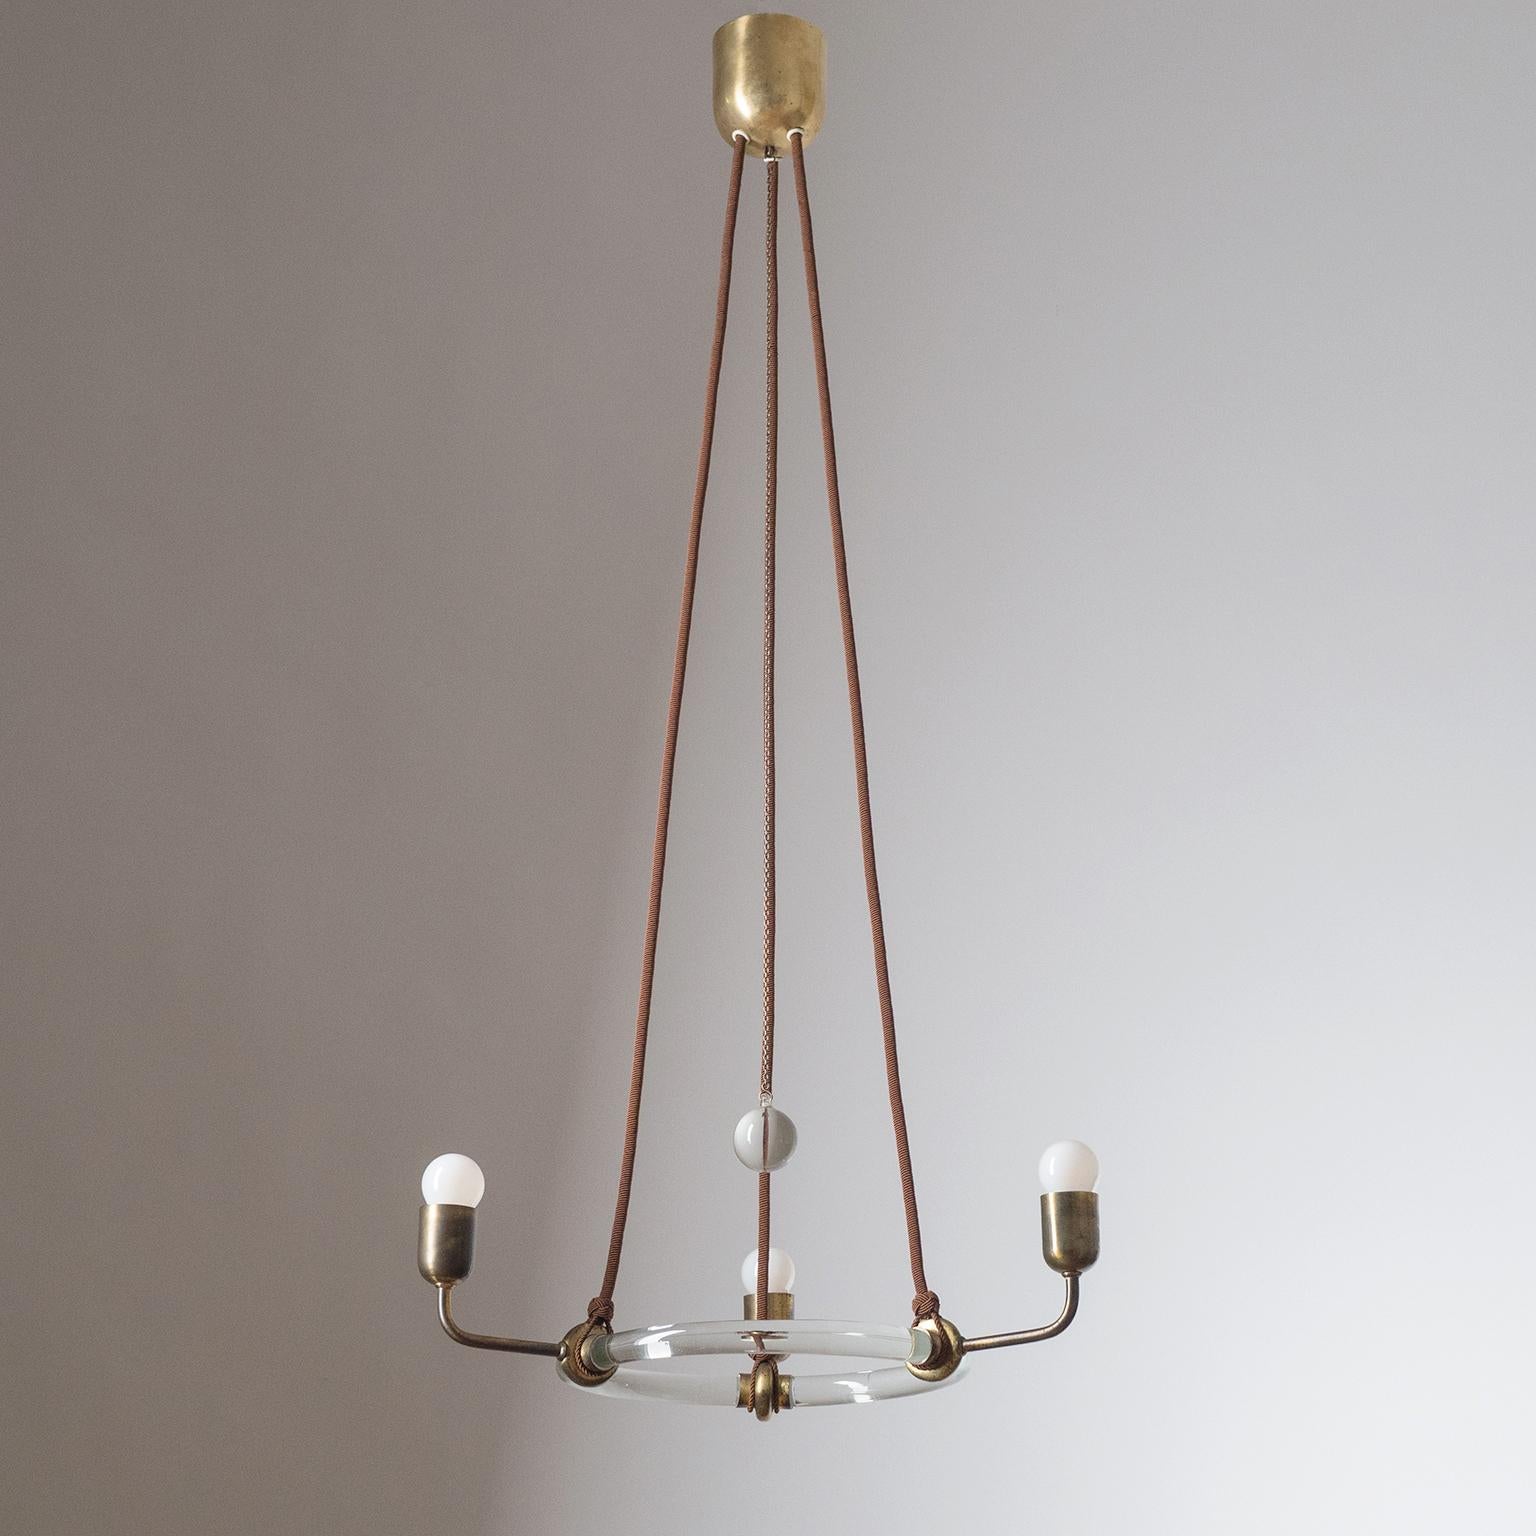 Rare suspension chandelier attributed to Adolf Loos (or his surroundings/pupils). A thick glass ring with three brass arms is suspended by custom cords (re-made after the original). Hanging from the large brass canopy is an original solid glass